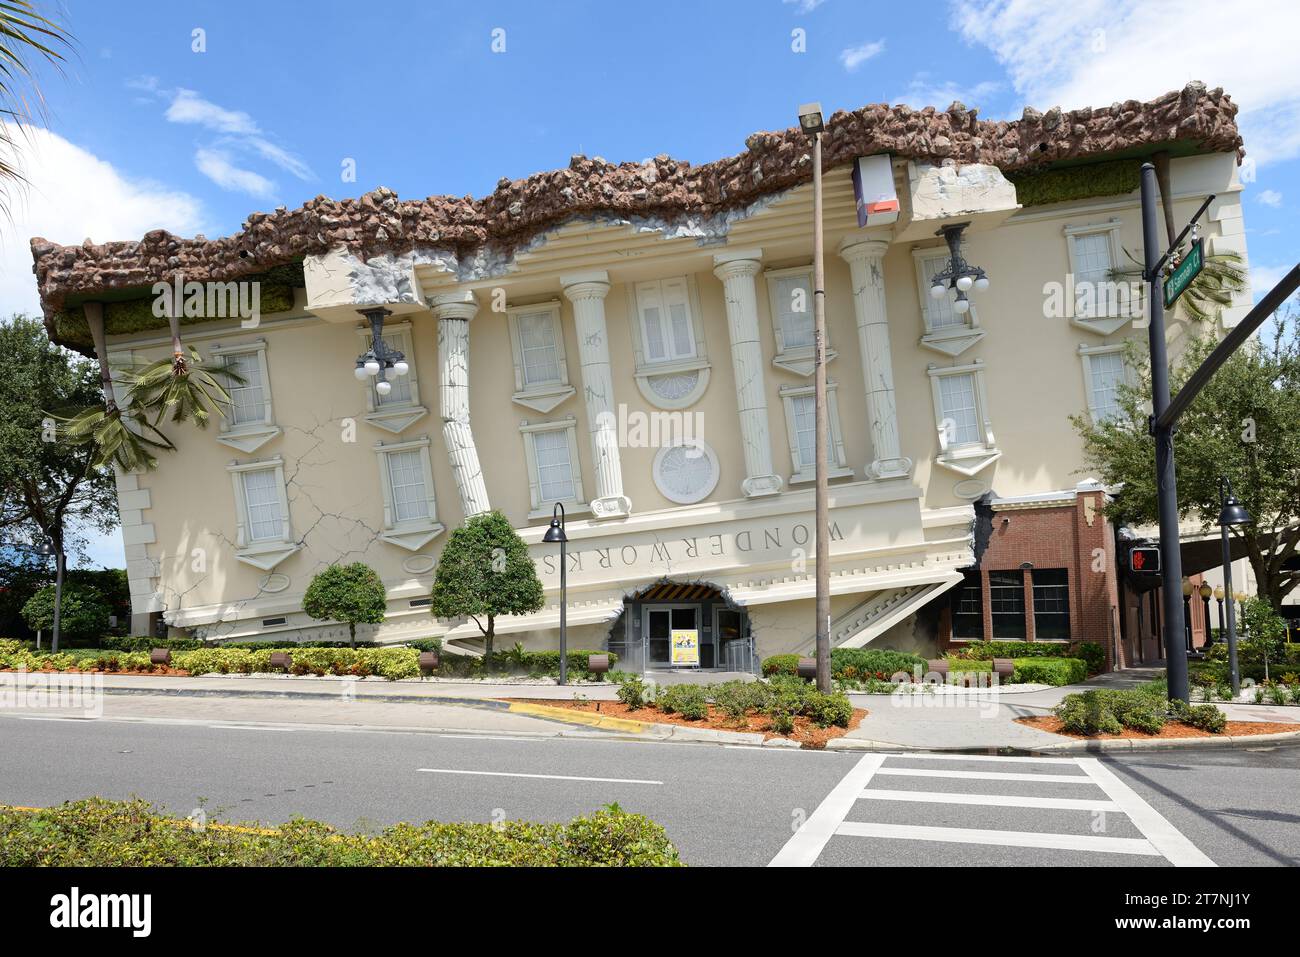 WonderWorks is an amusement park for the mind with 35,000 square feet of entertainment inside the upside-down house in Orland, Florida Stock Photo